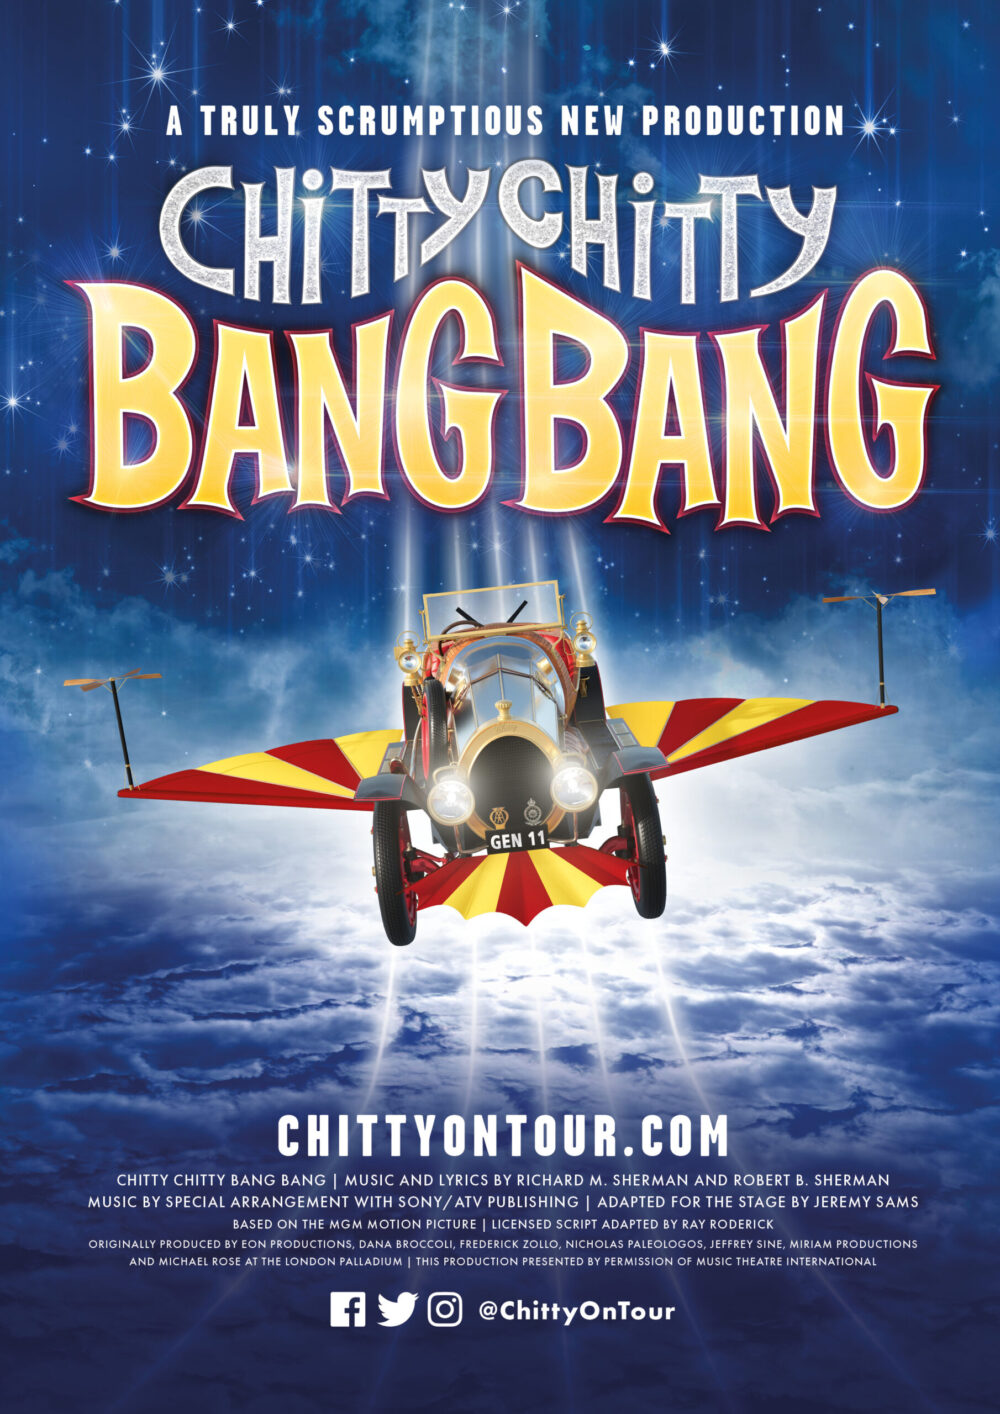 Adam Garcia will join the cast of Chitty Chitty Bang Bang